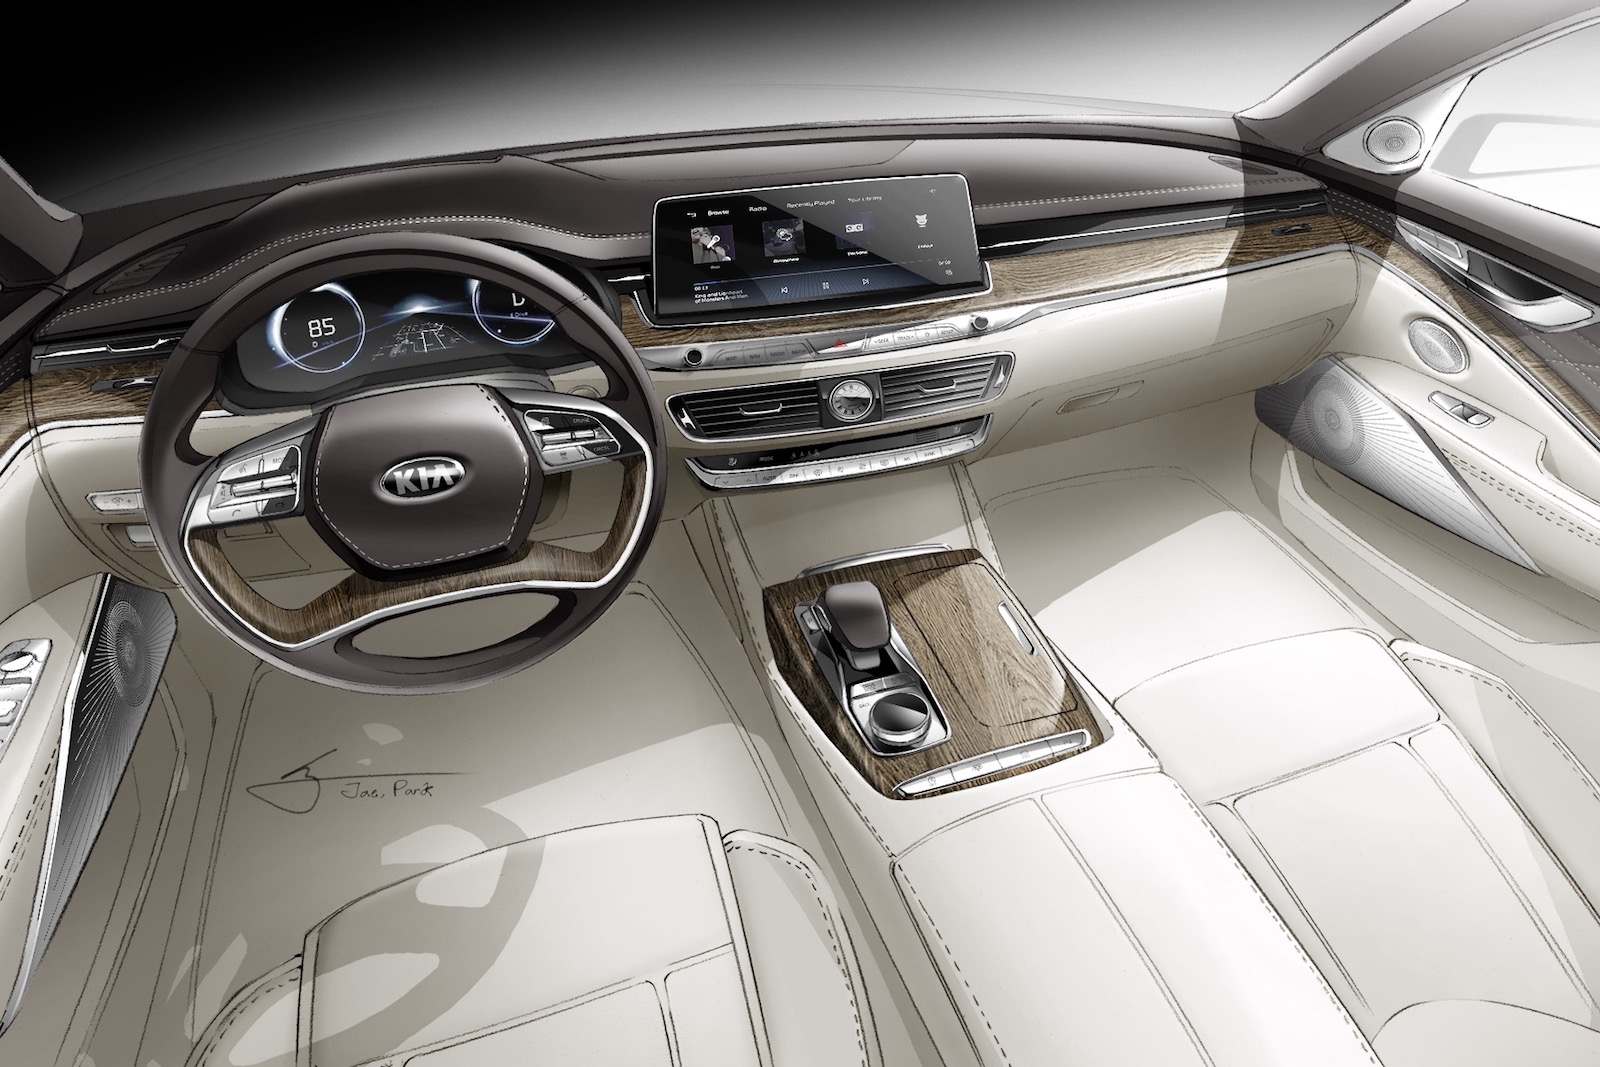 2019 Kia K900 interior previewed with official sketch